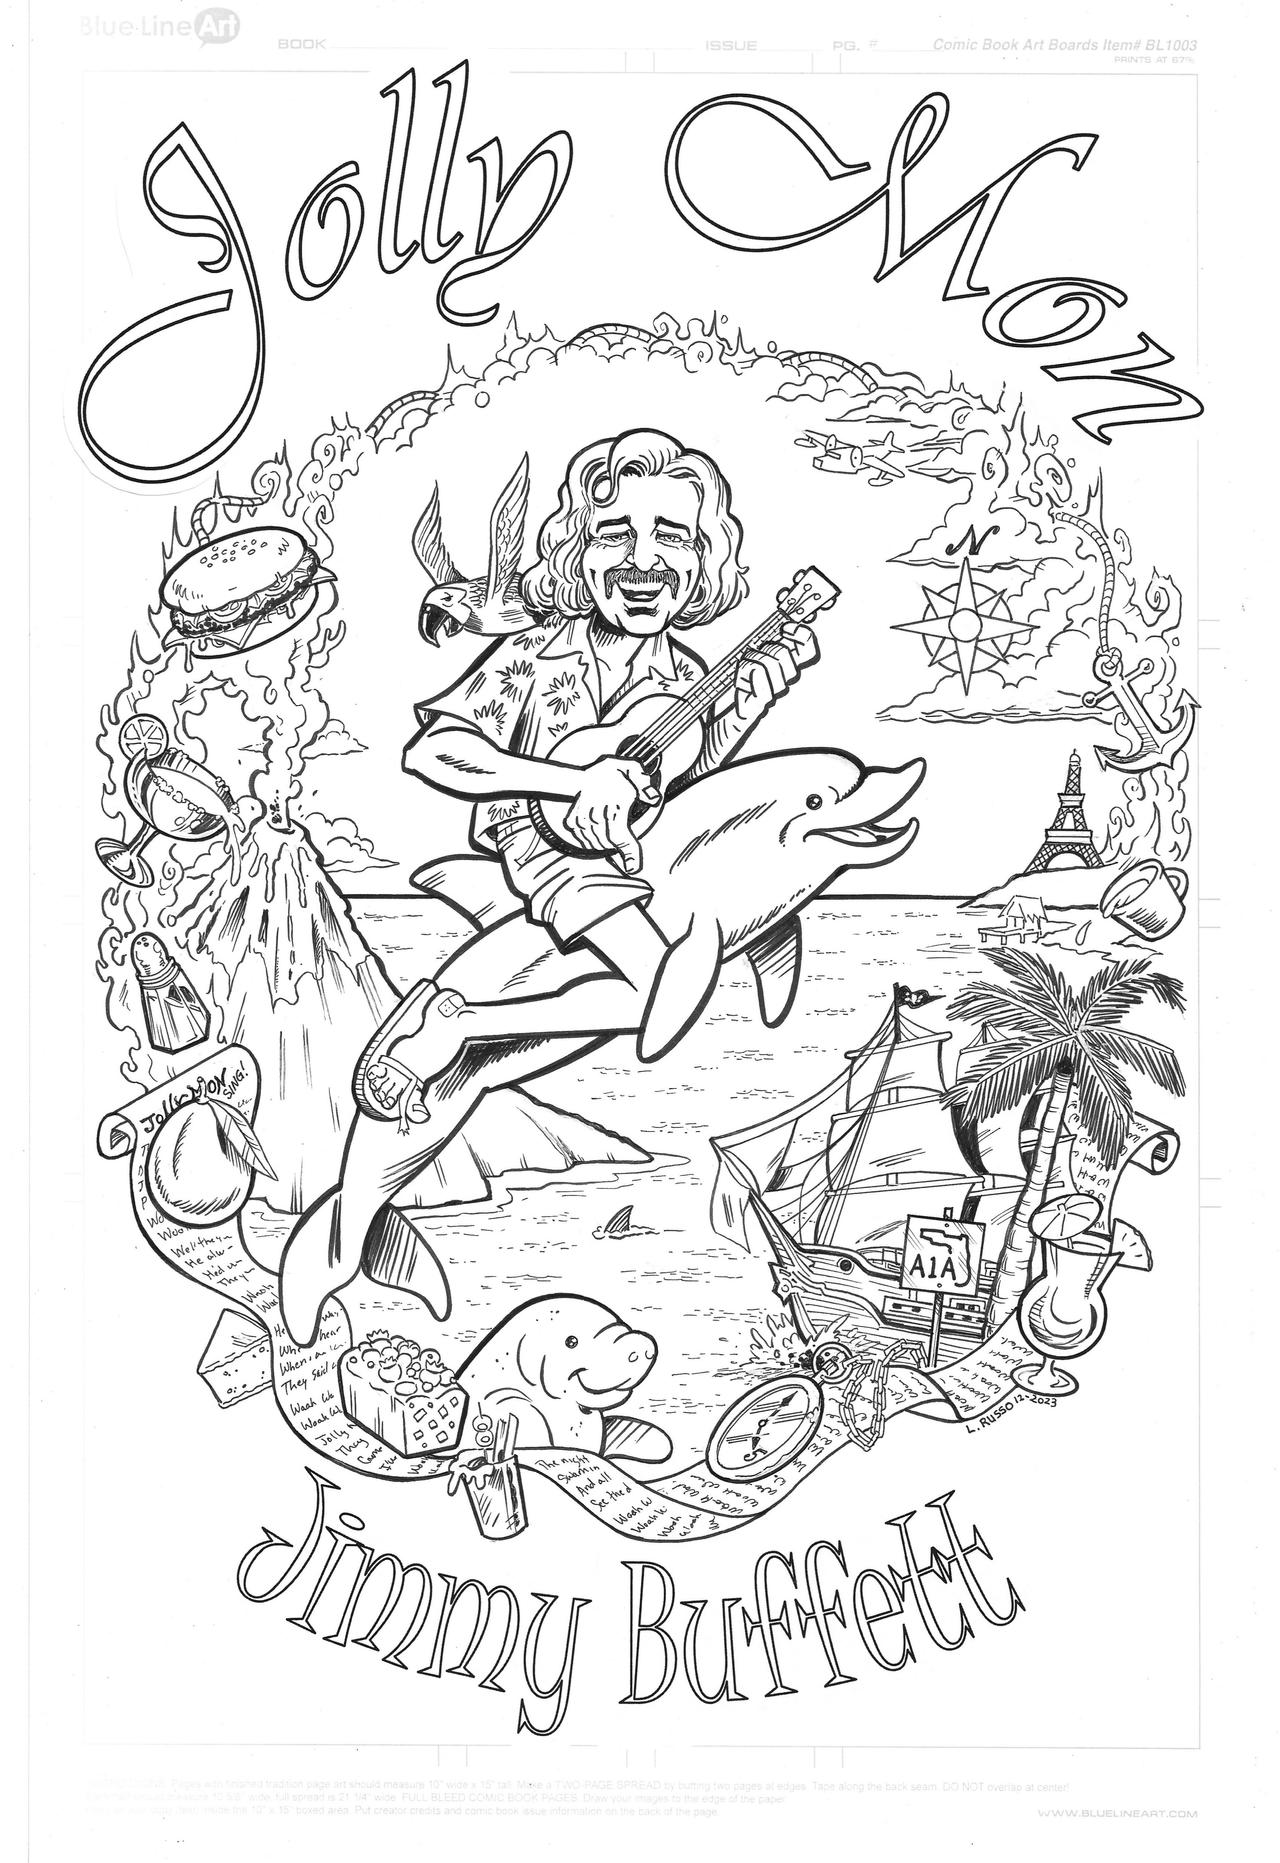 Jimmy Buffett Creative Relief Coloring Book: Powerful Motivation